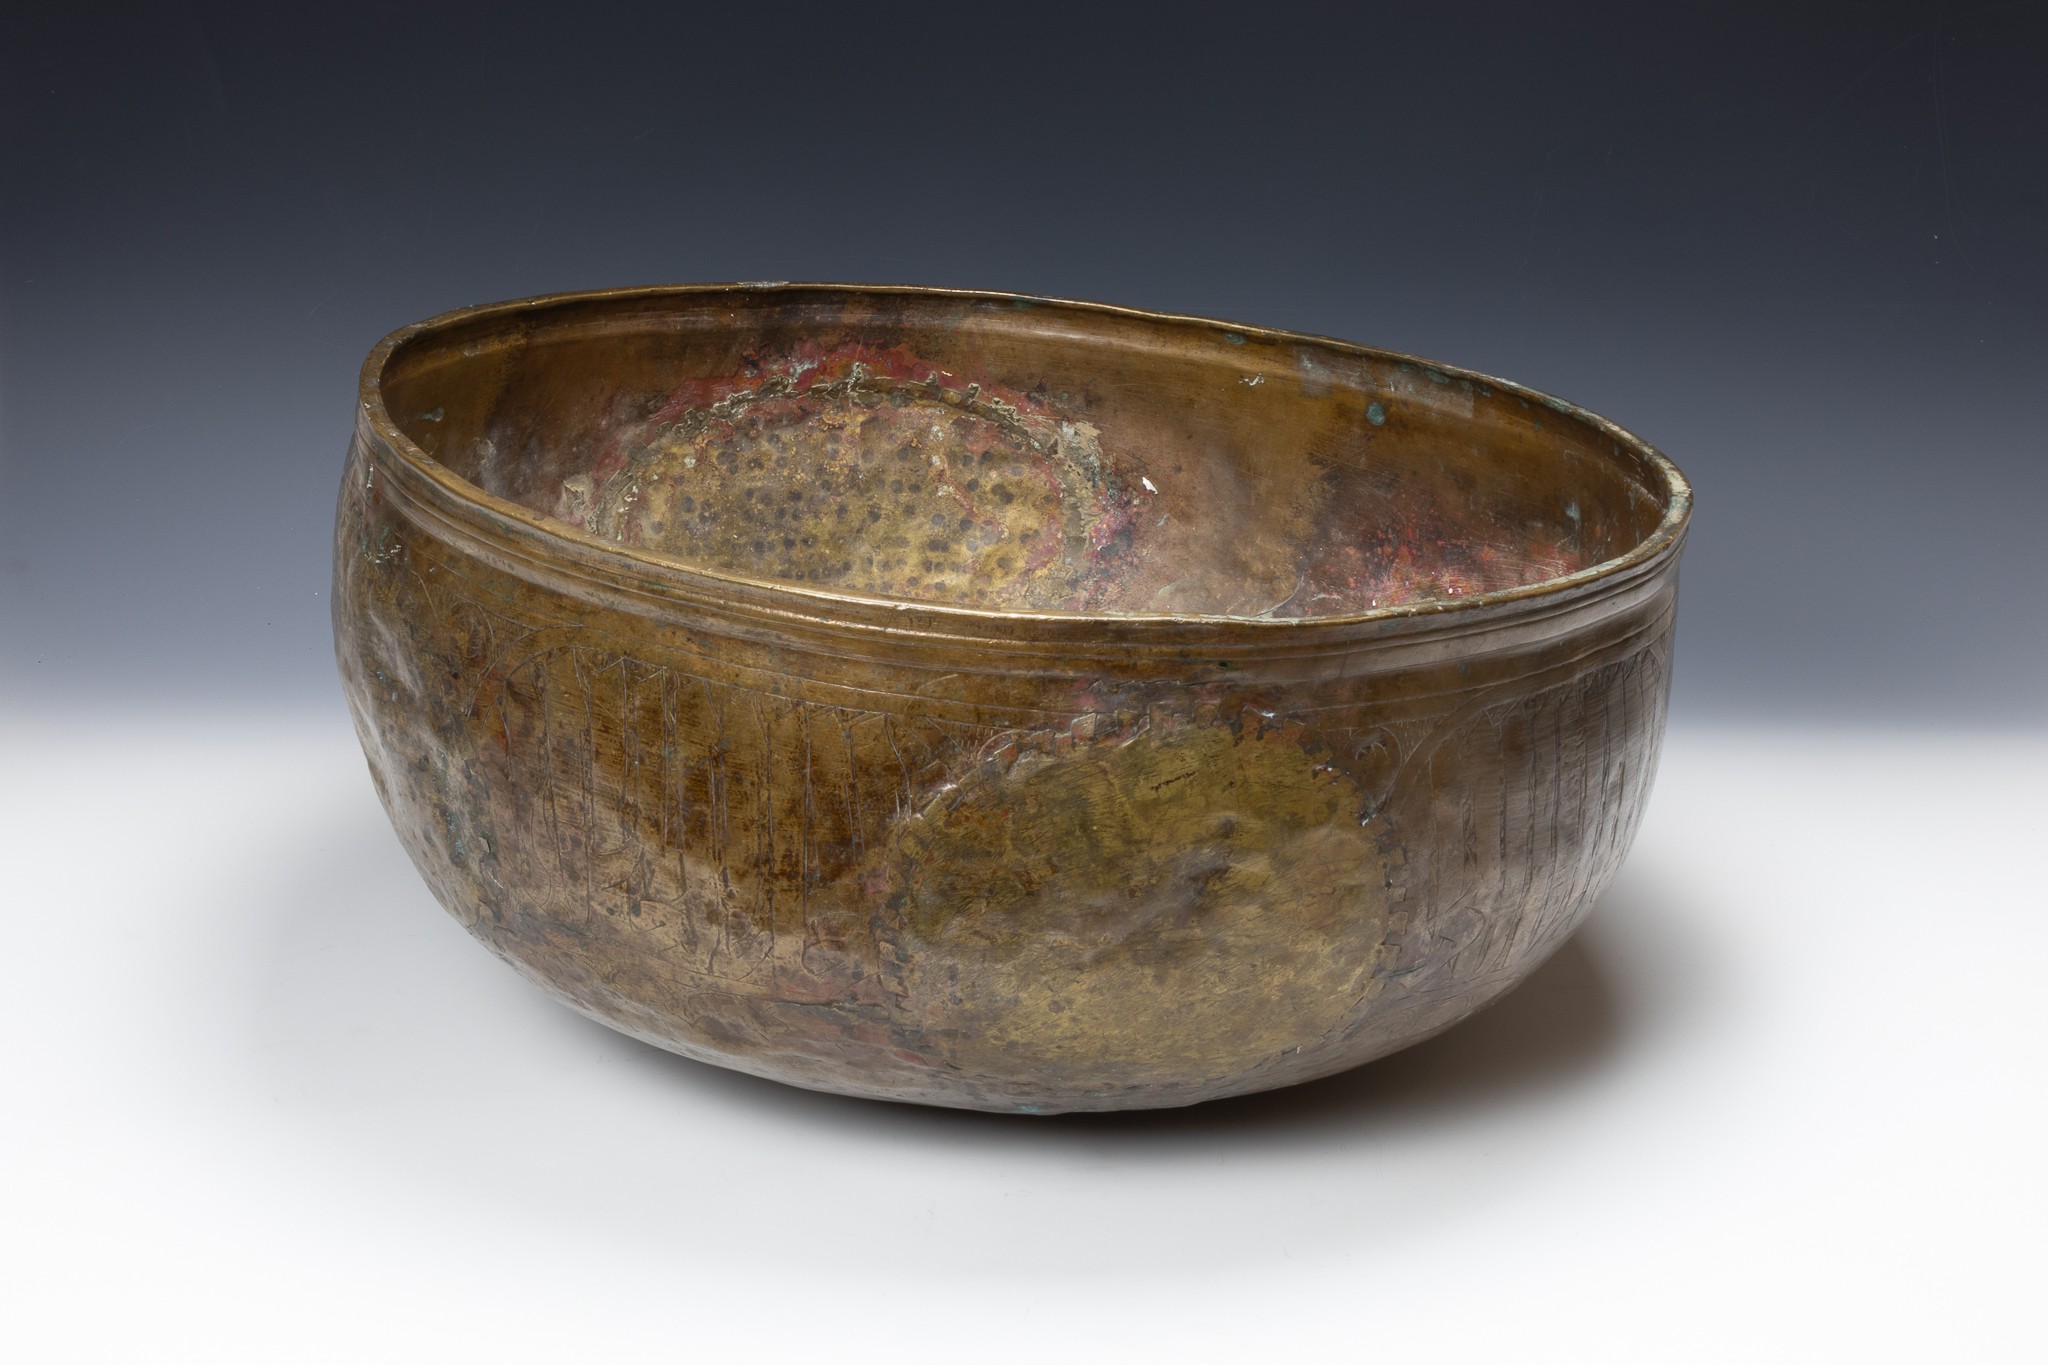 A Large Islamic Mamluk Brass Bowl from the 15th Century with Islamic Calligraphy Engraving.

D: Appr